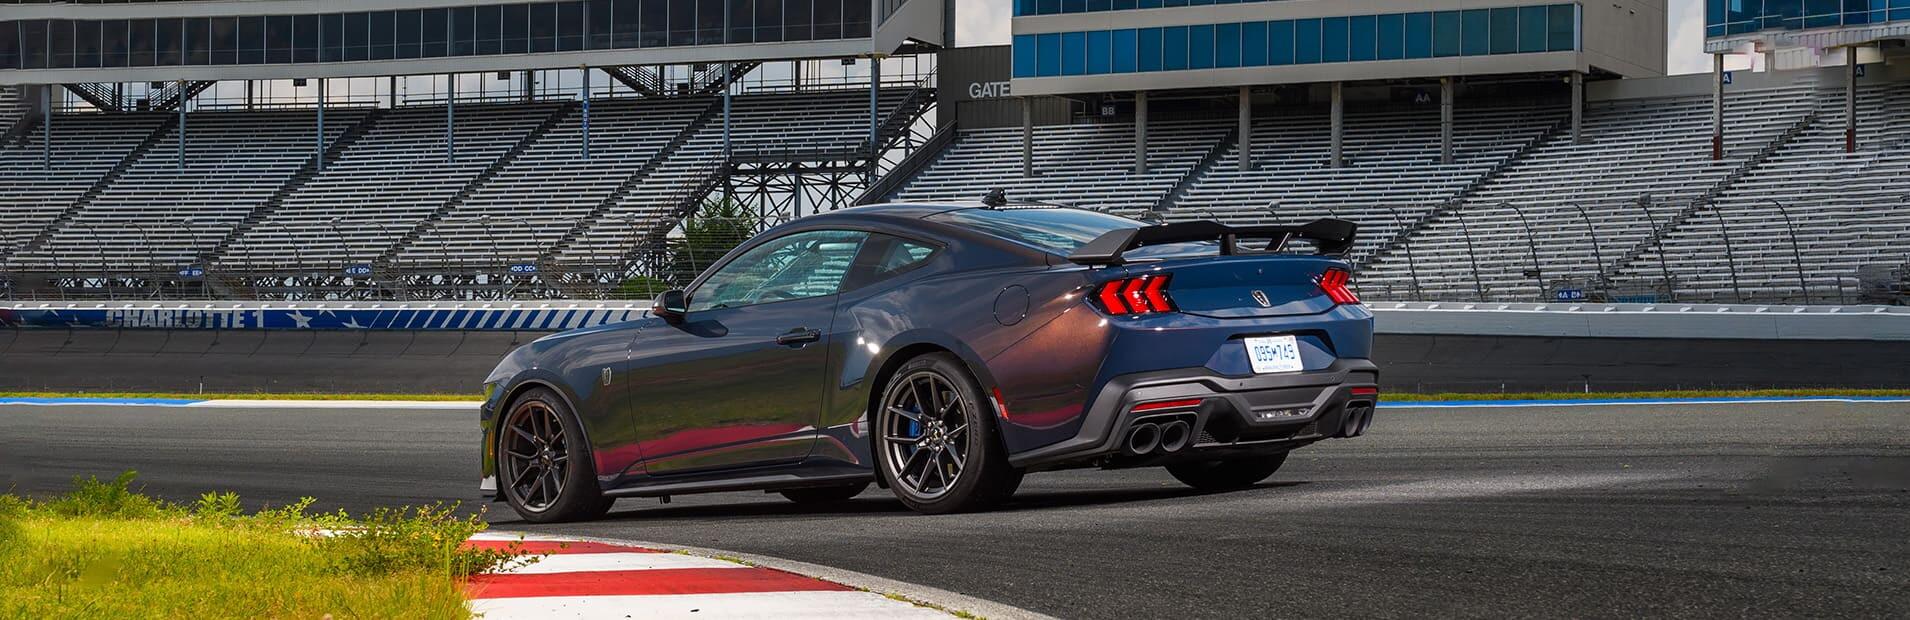 Pirelli helps the all-new Ford Mustang Dark Horse unleashes its power